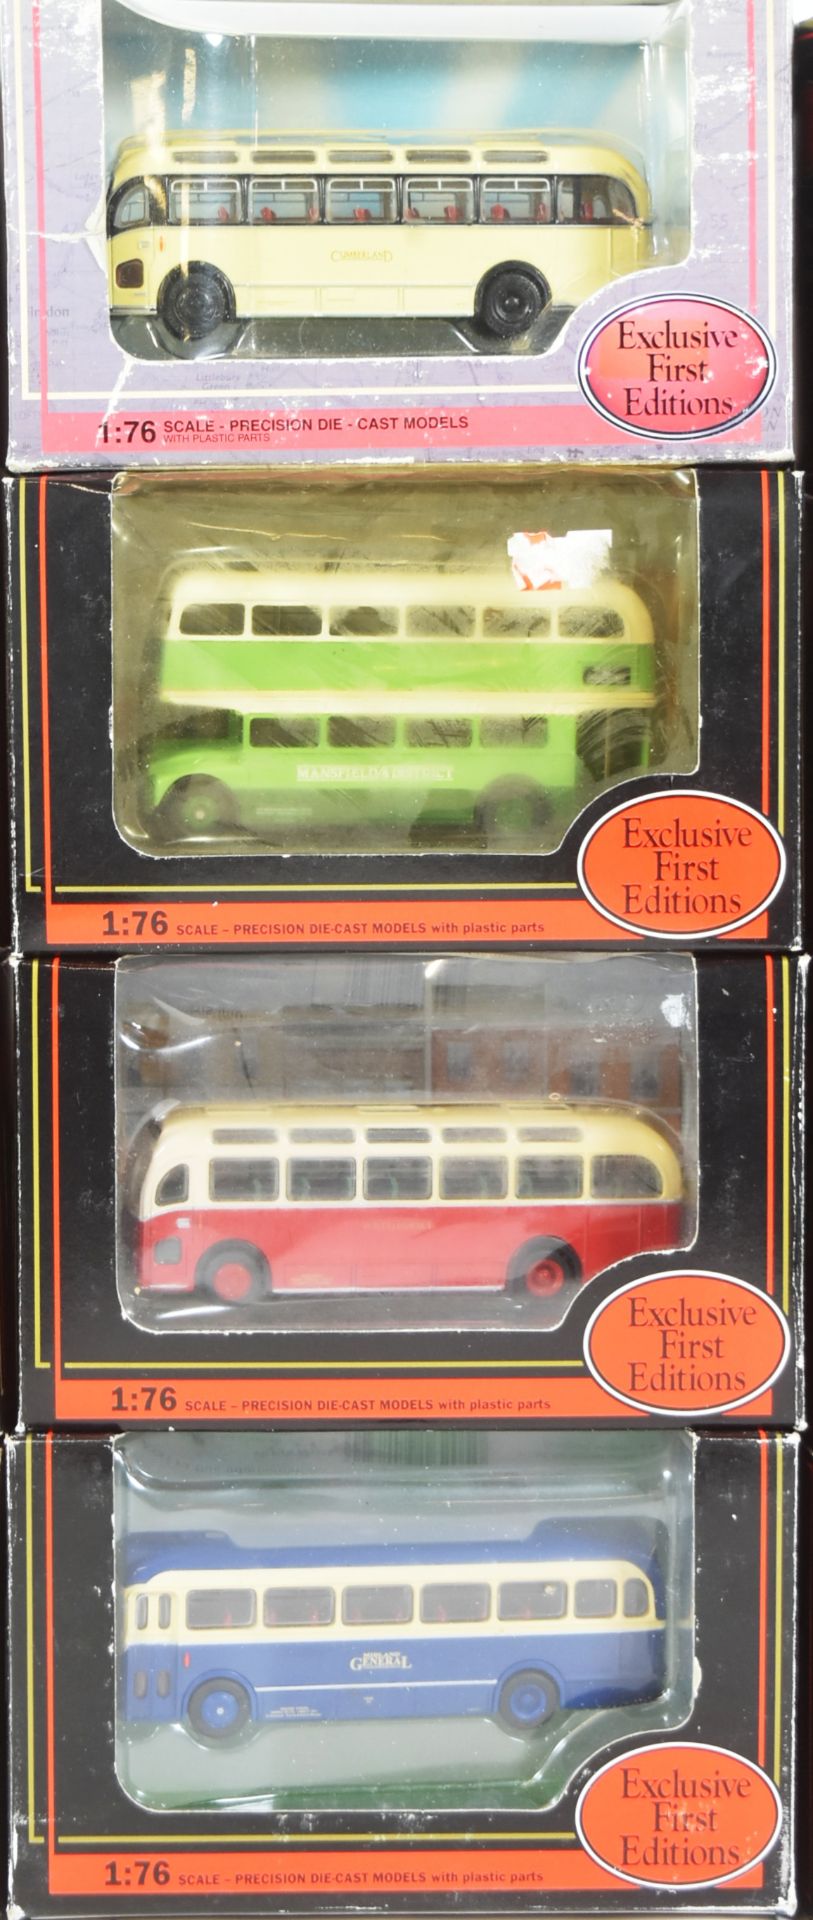 DIECAST - EFE EXCLUSIVE FIRST EDITIONS DIECAST MODEL BUSES - Image 4 of 6